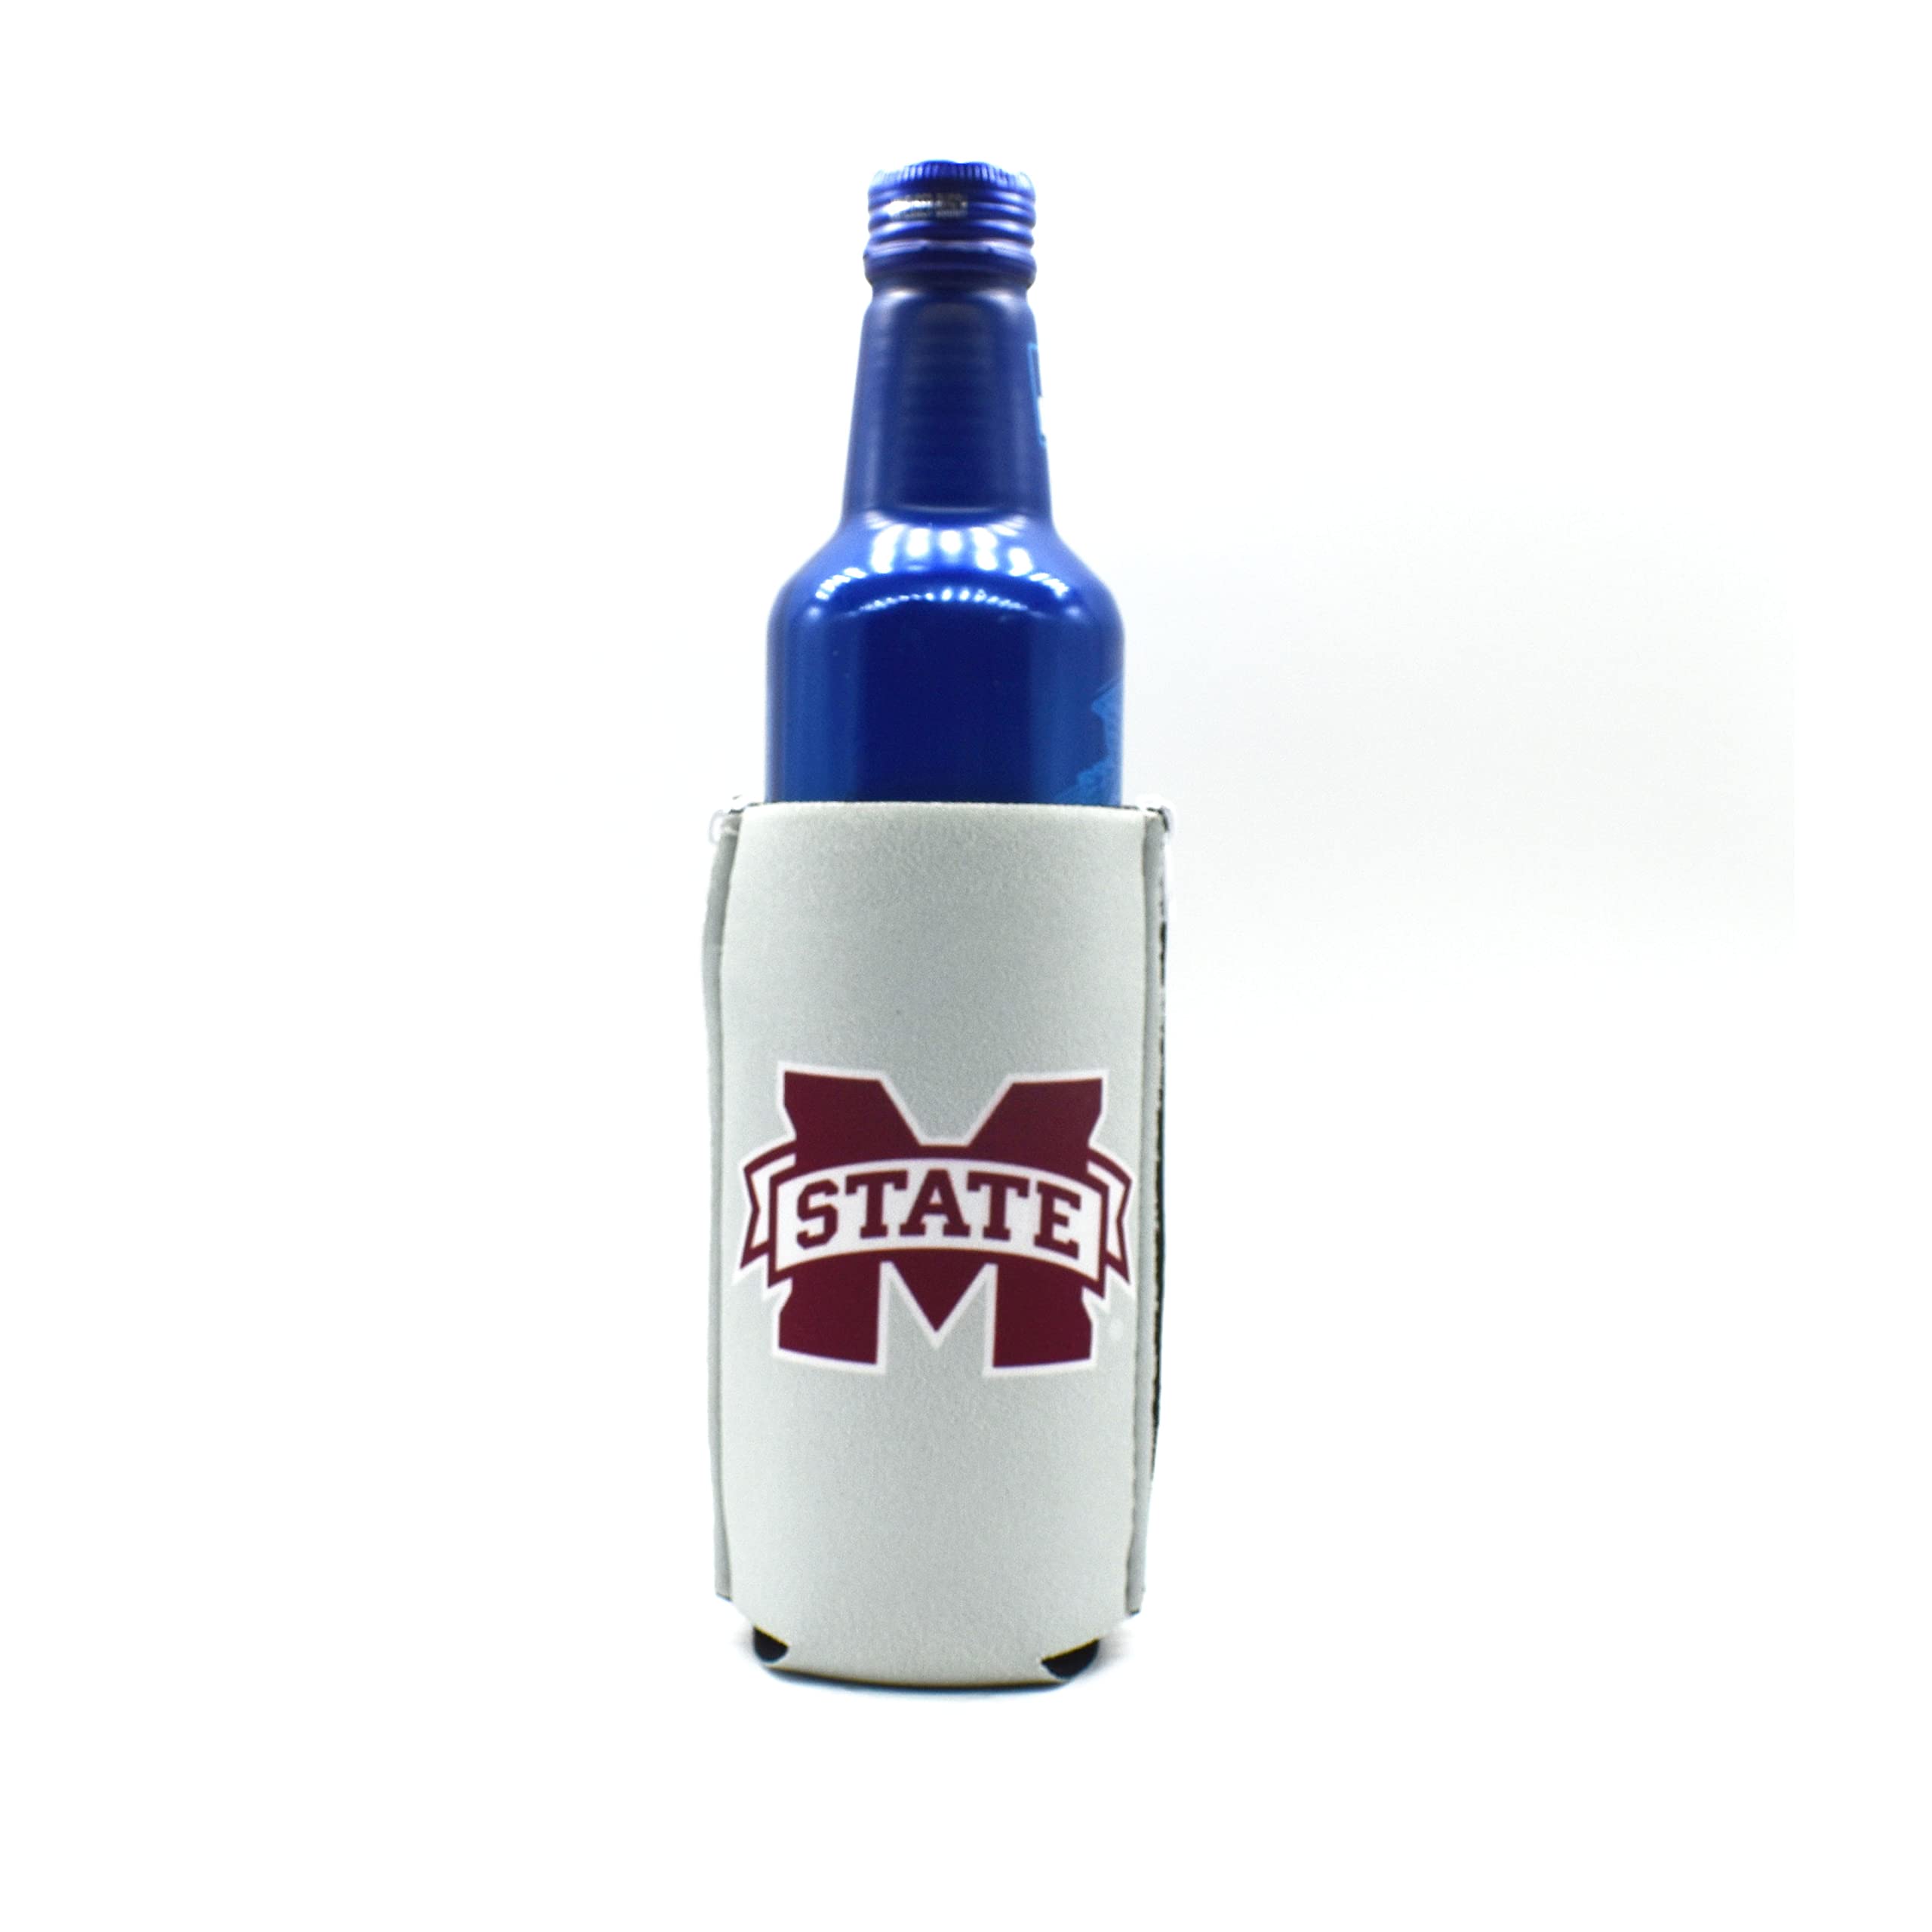 ZipSip NONMAGNET- MSU Adjustable All-In-One Coozie with Zippers for Cans, Bottles, Slim Cans, Pint Glasses, Party Cups – Can Cooler - Insolated Neoprene Sleeve - MSU Bulldogs Light Gray, Large